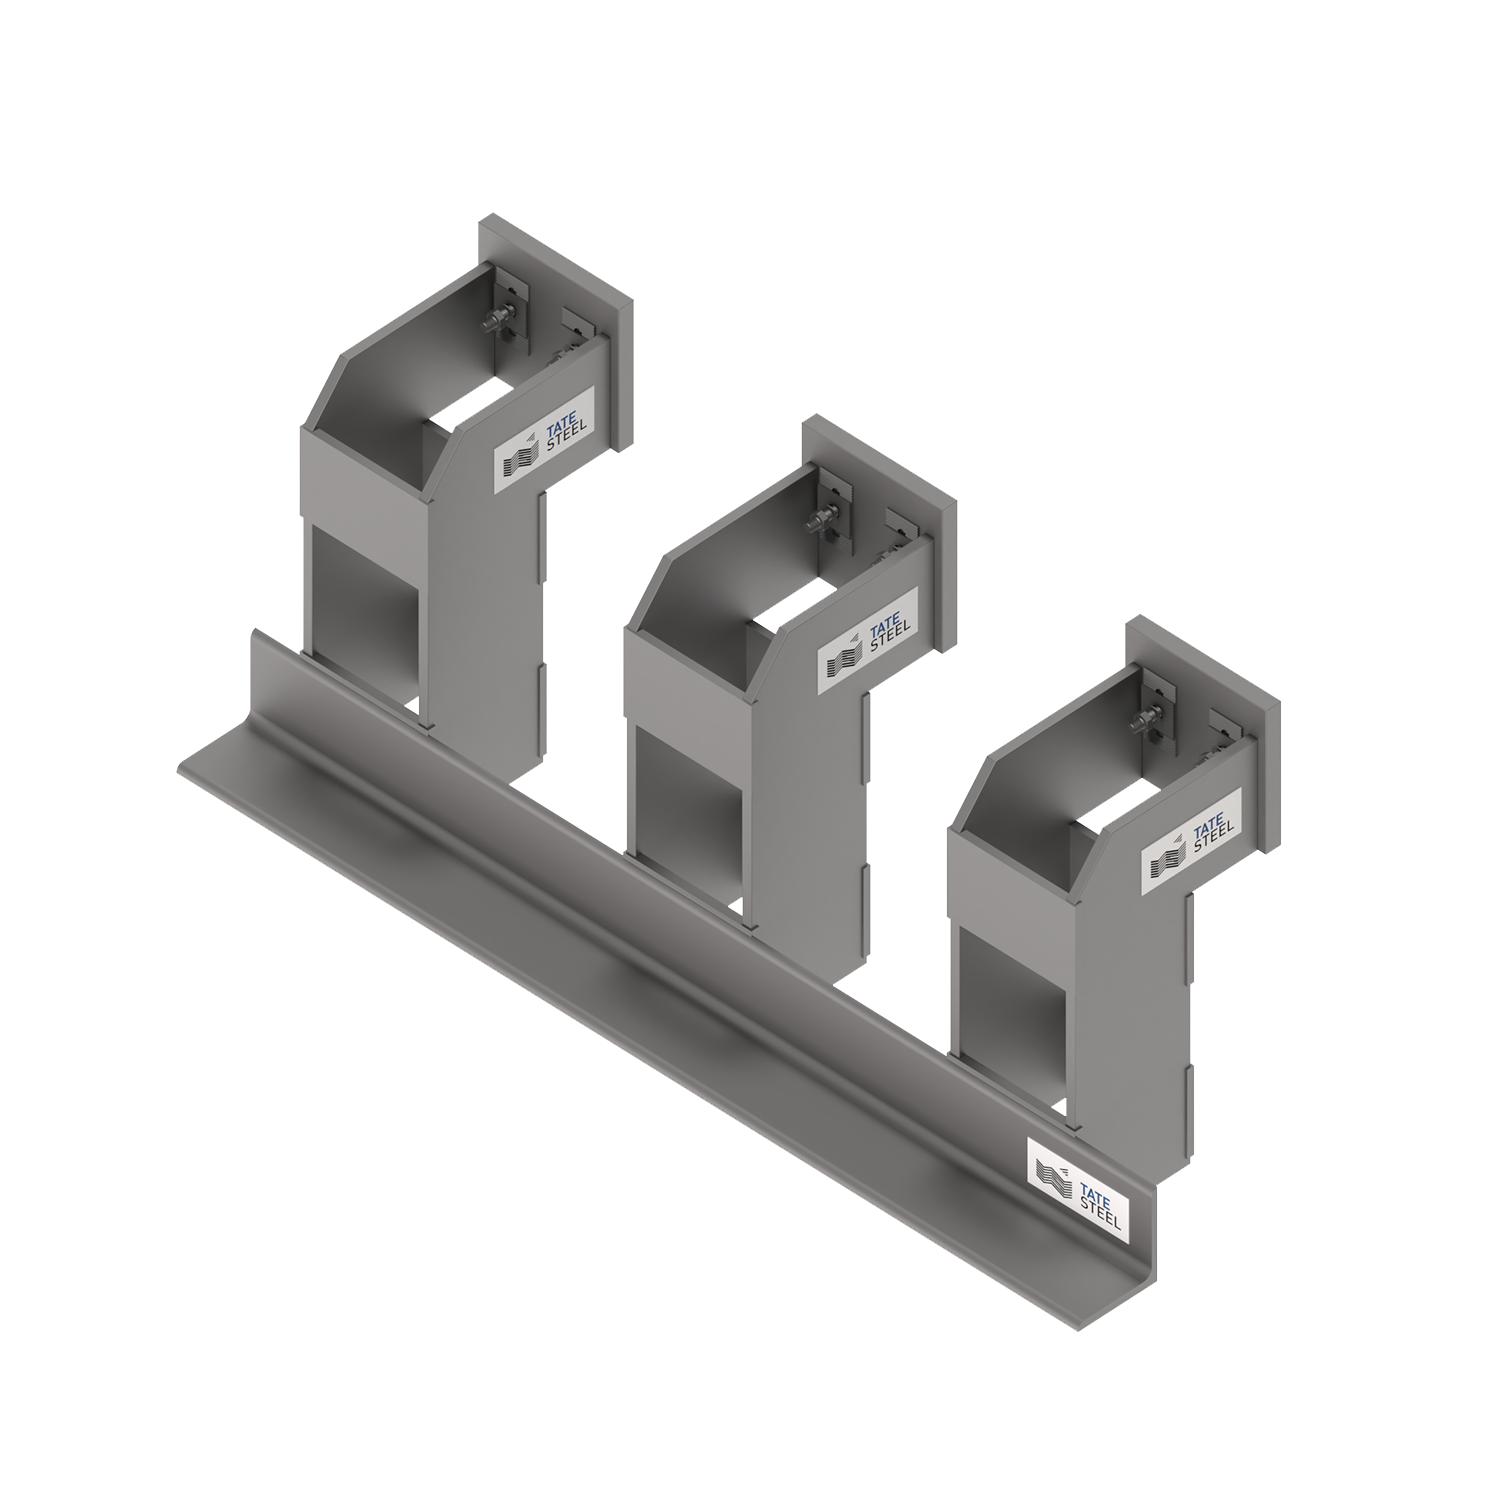 01_Masonry Support Wide Cavity Drop Down System - 3D Render_Bracket Only.png